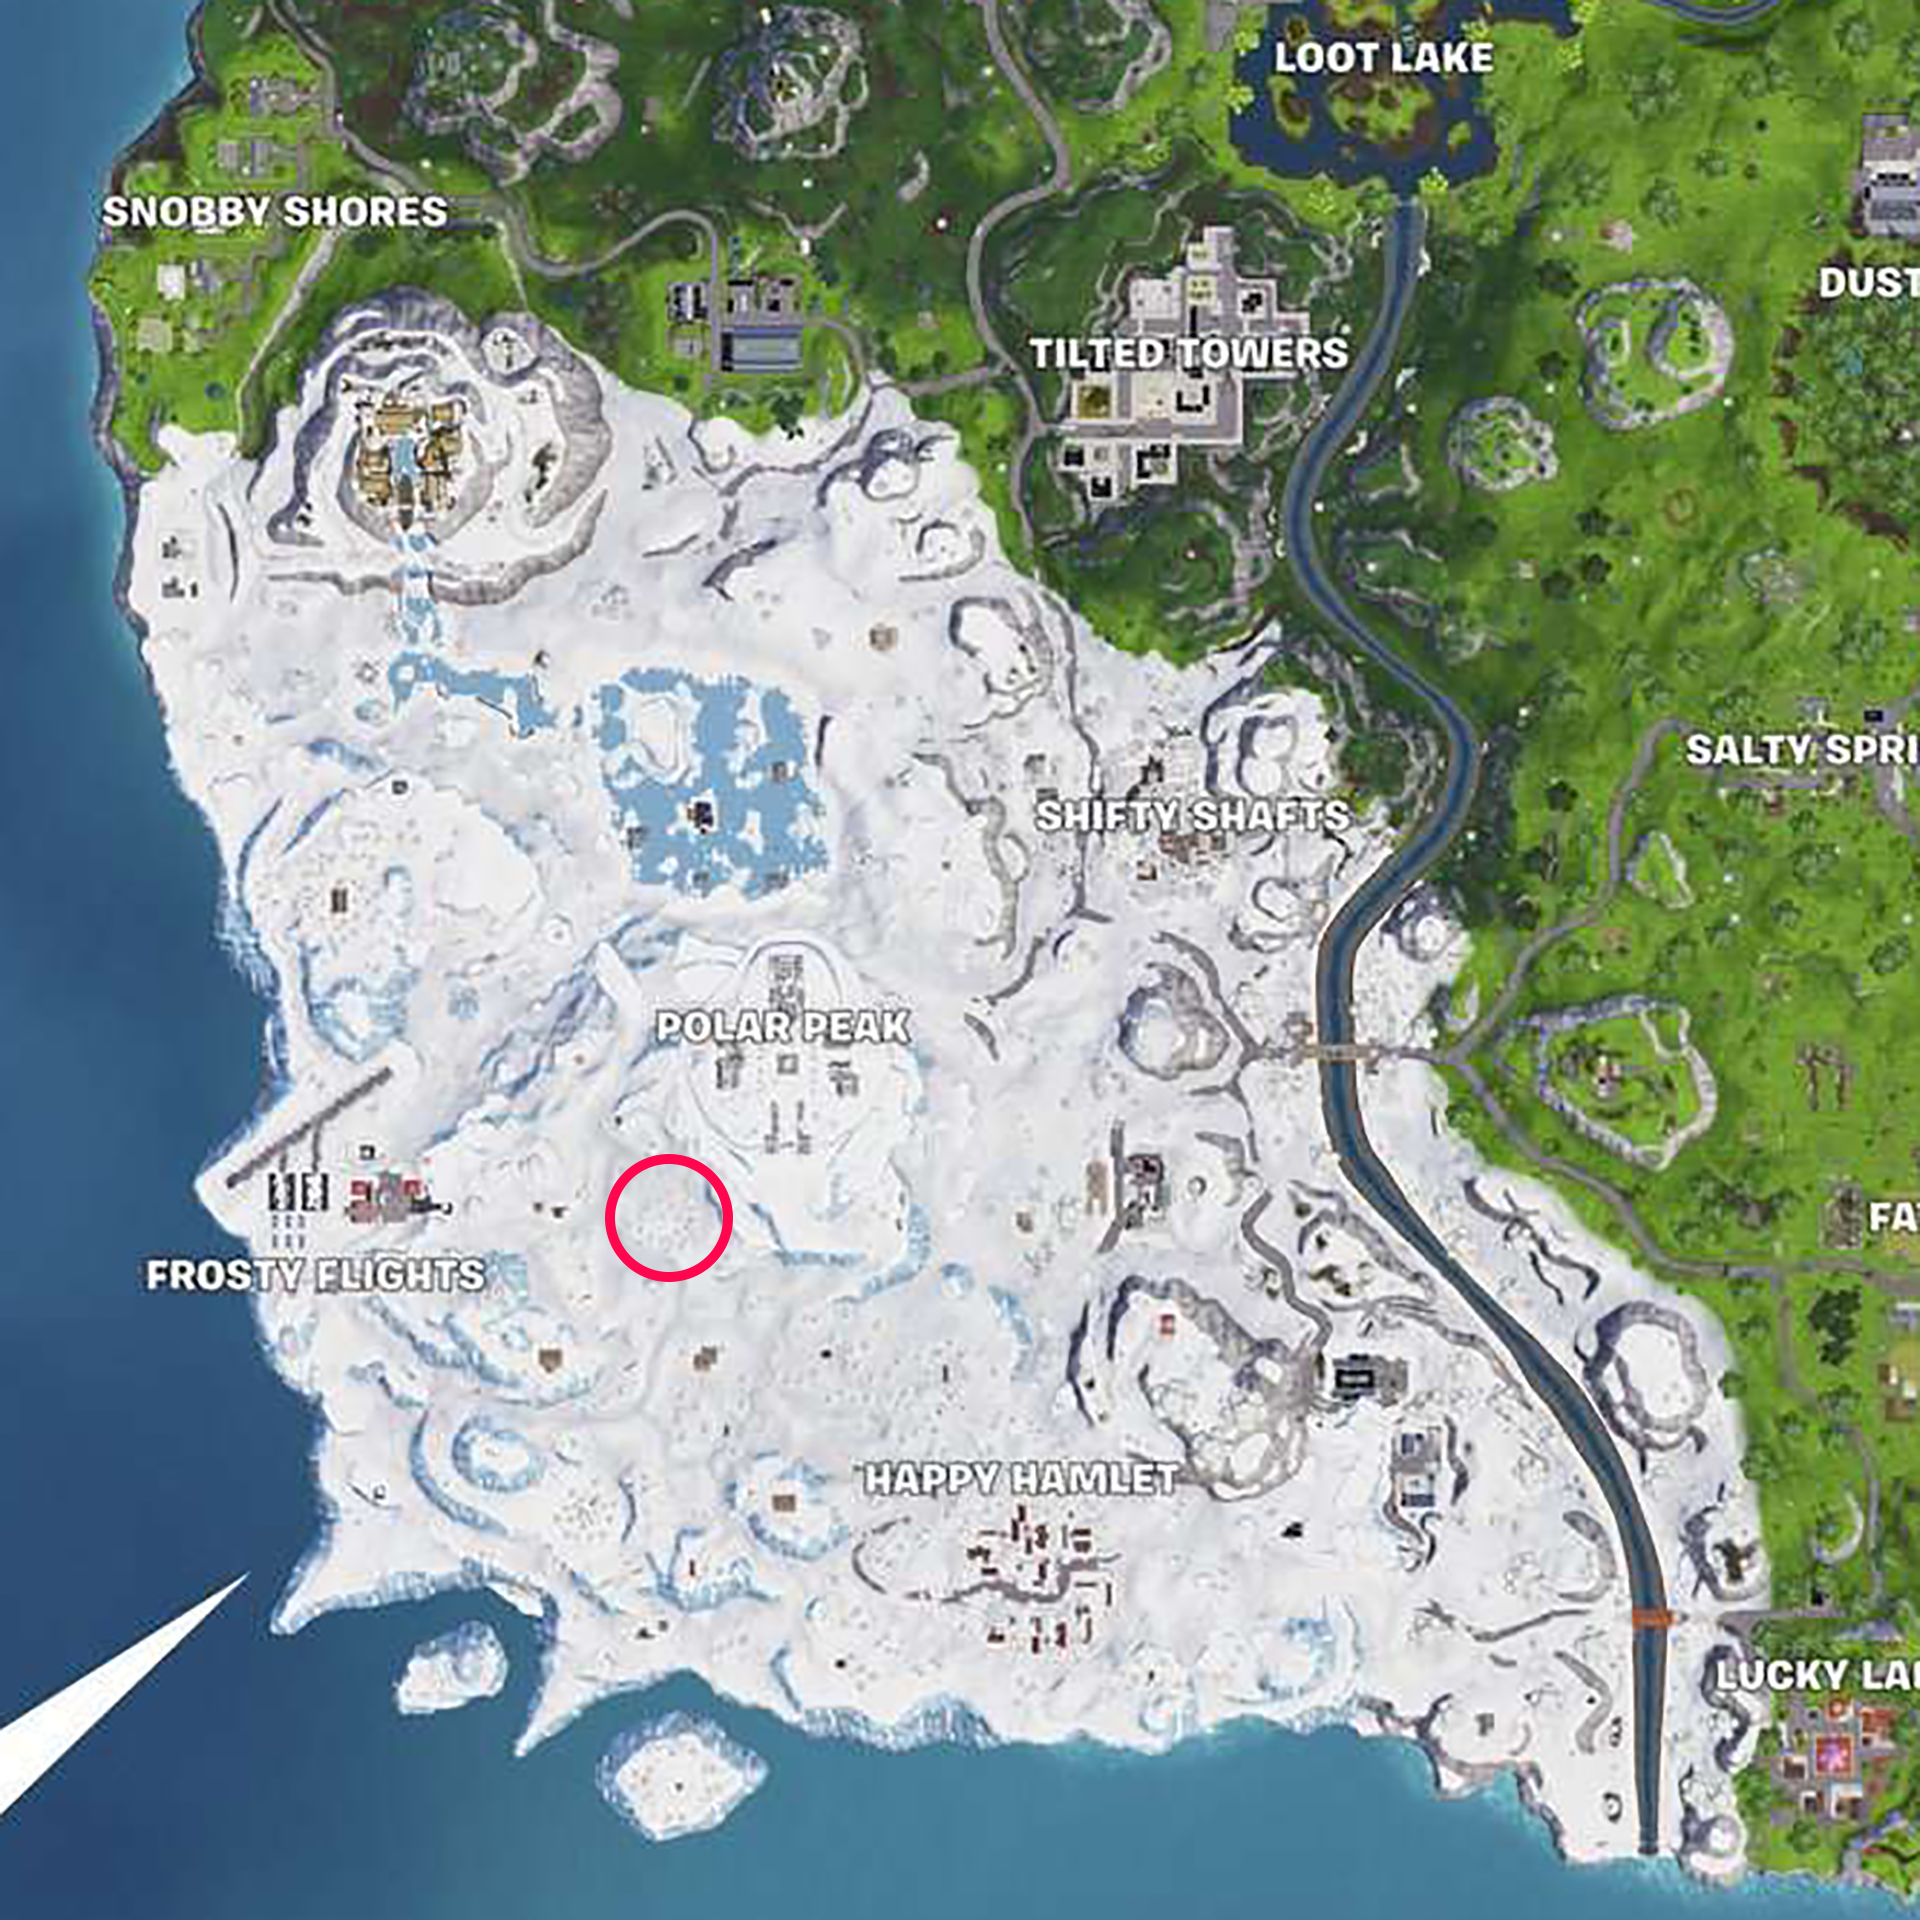 fortnite treasure map magnifying glass location fortnite week 3 challenges how to find where magnifying glass sits - fortnite treasure map loading screen magnifying glass